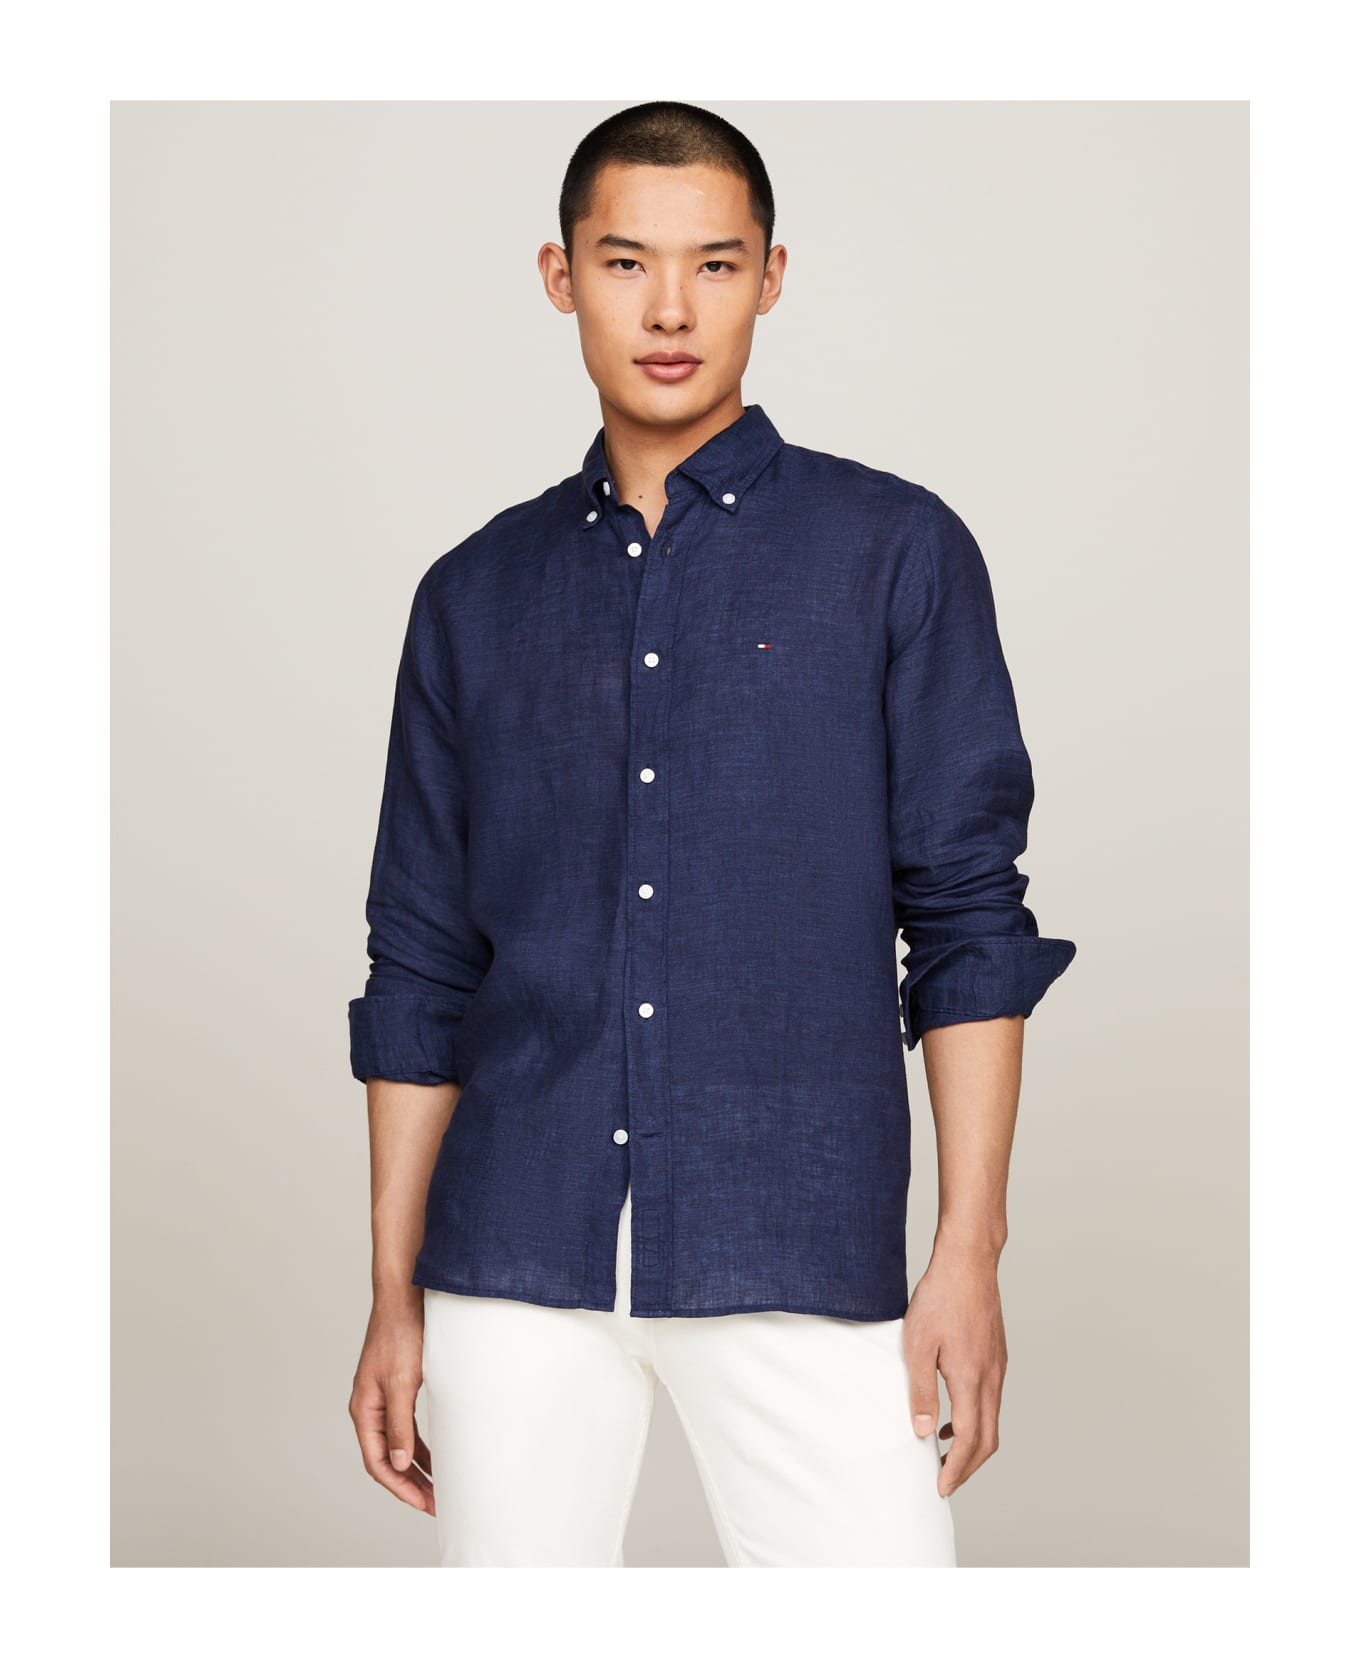 Tommy Hilfiger Navy Blue Shirt With Logo - CARBON NAVY